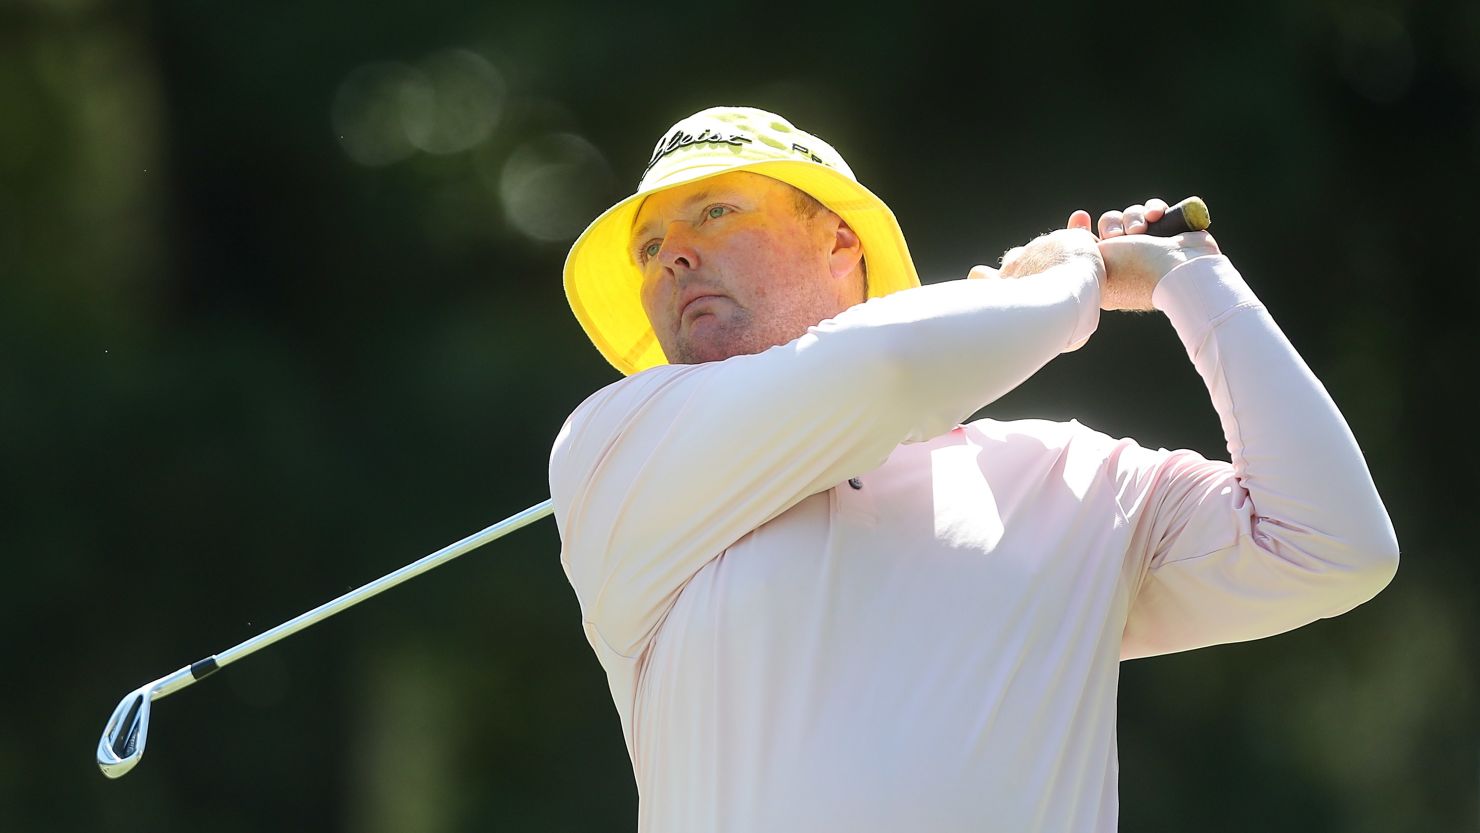 Jarrod Lyle suffered a third recurrence of cancer last year.